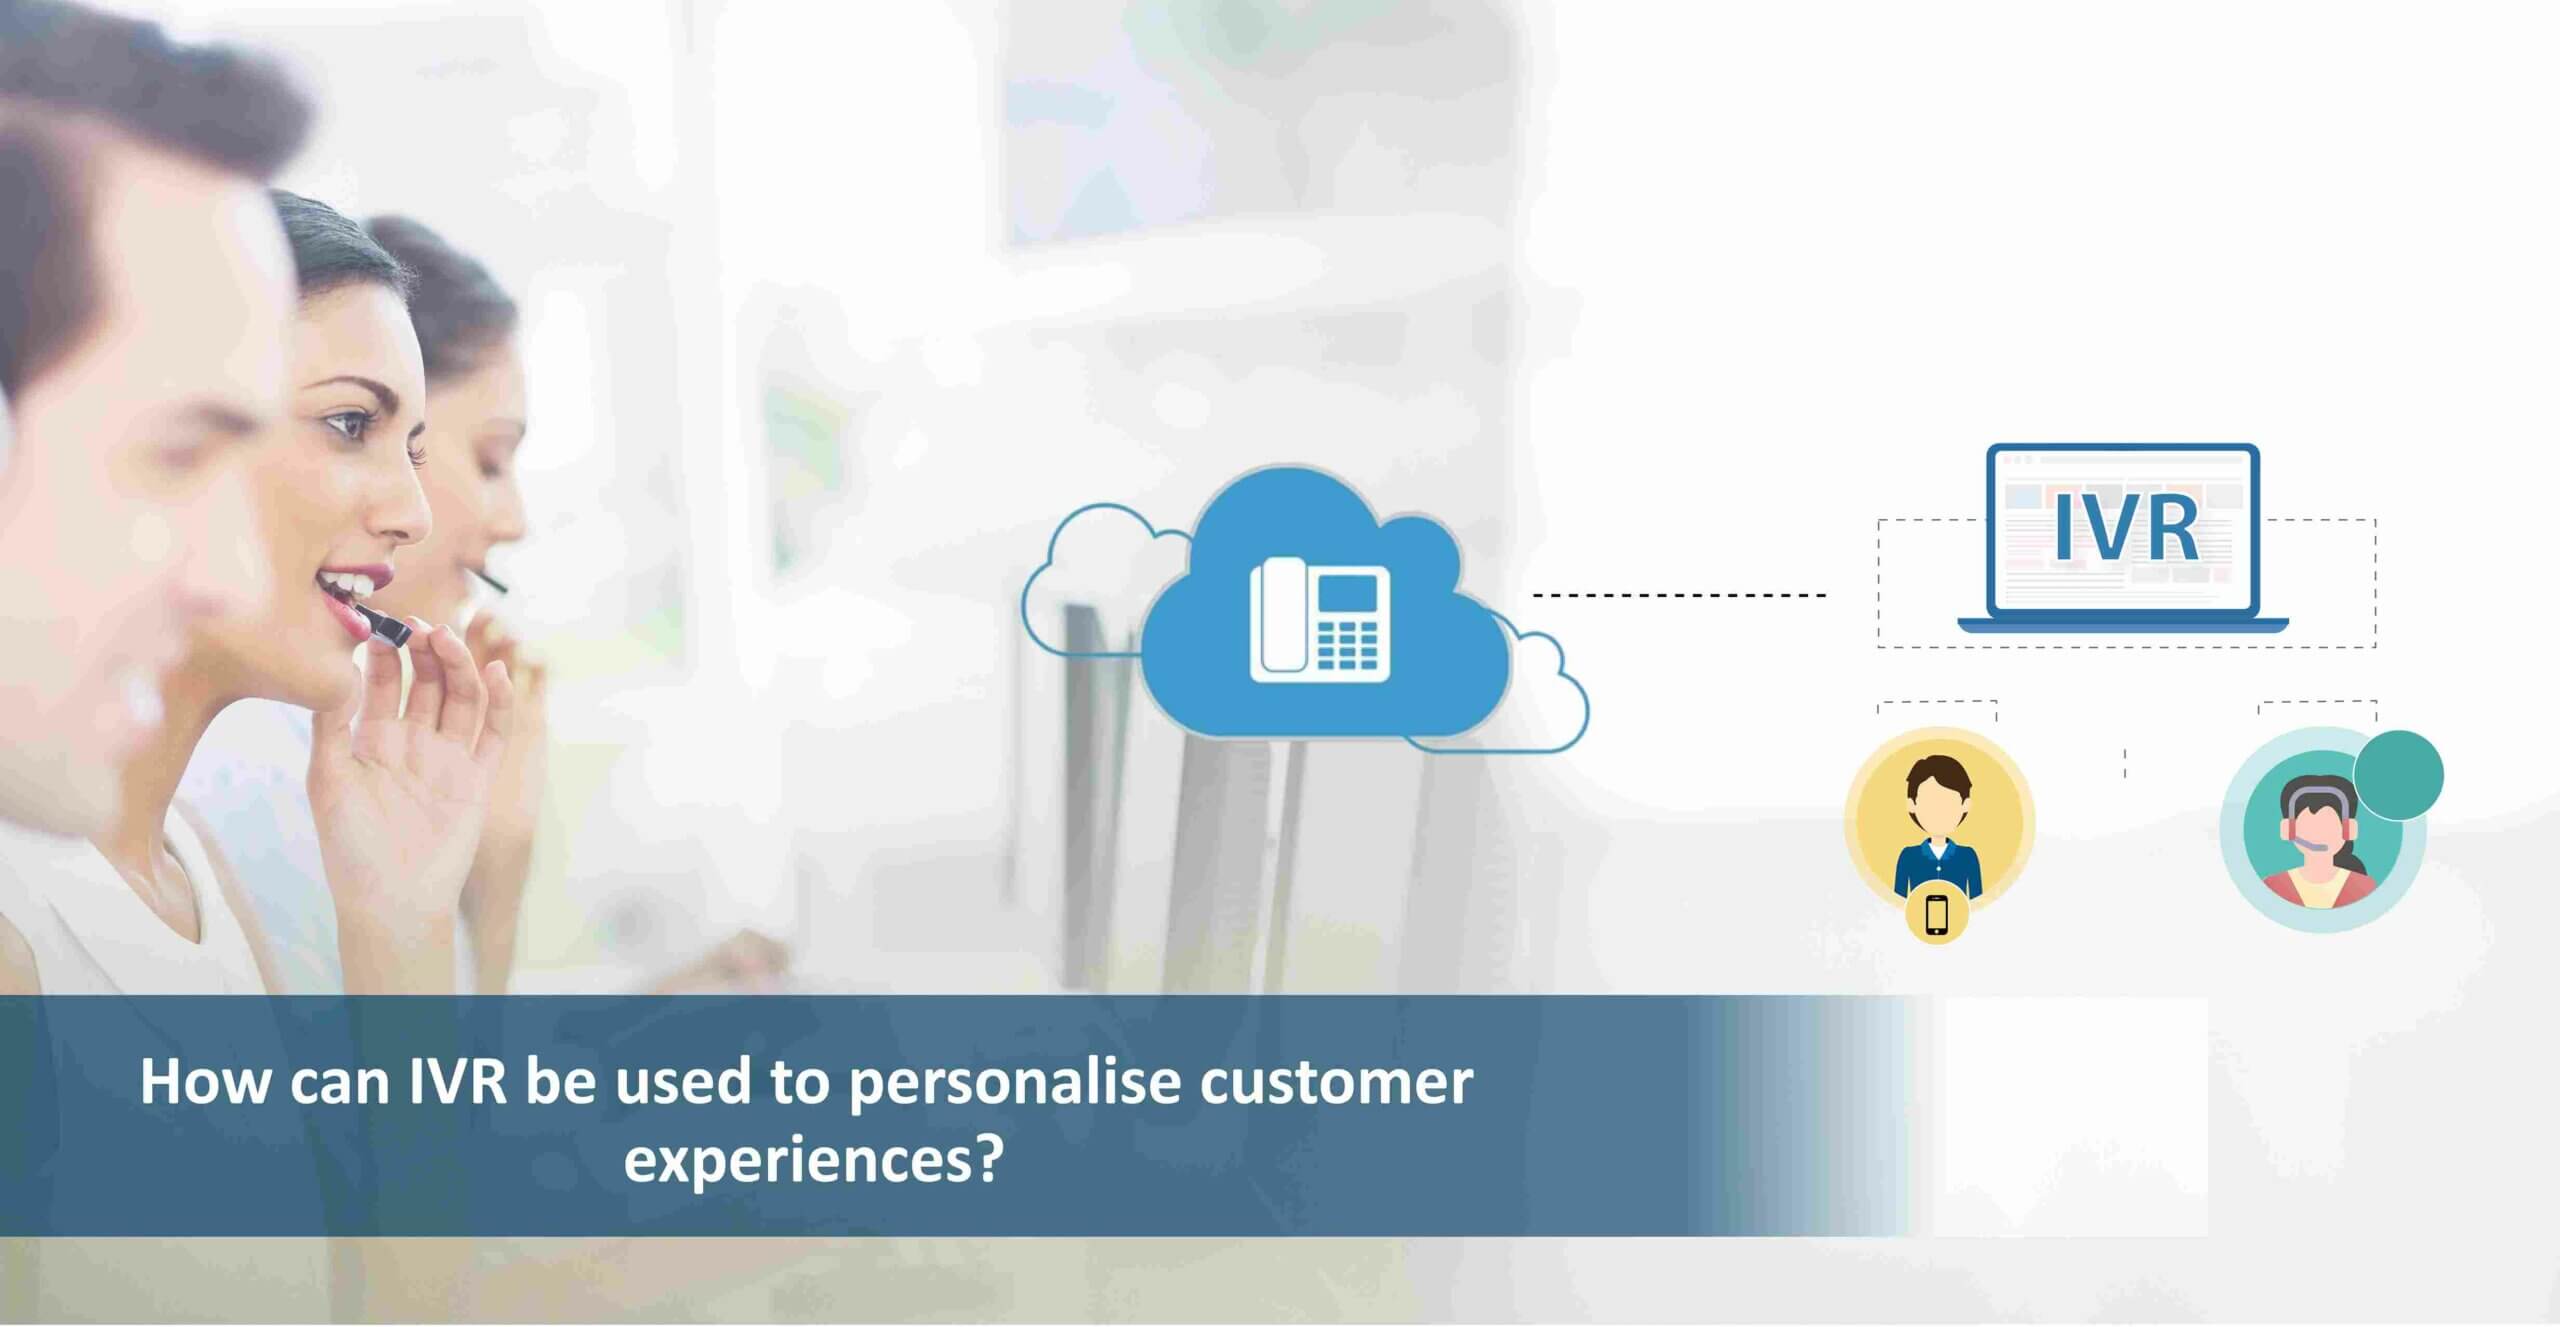 How can IVR System be used to personalize customer experiences?